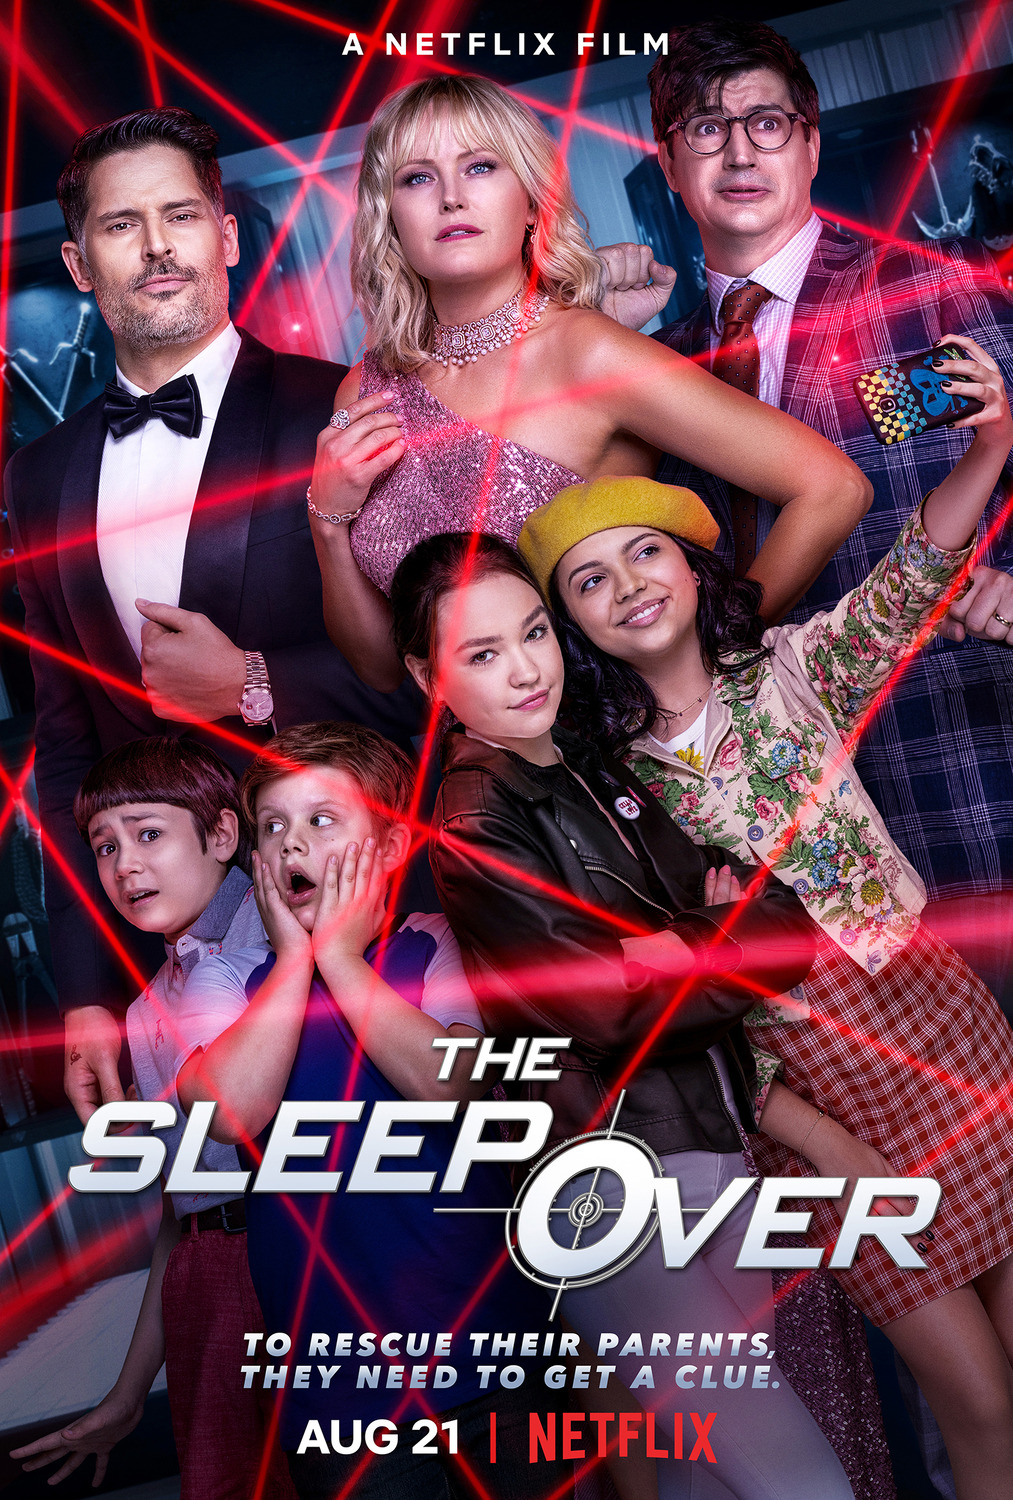 Extra Large TV Poster Image for The Sleepover 